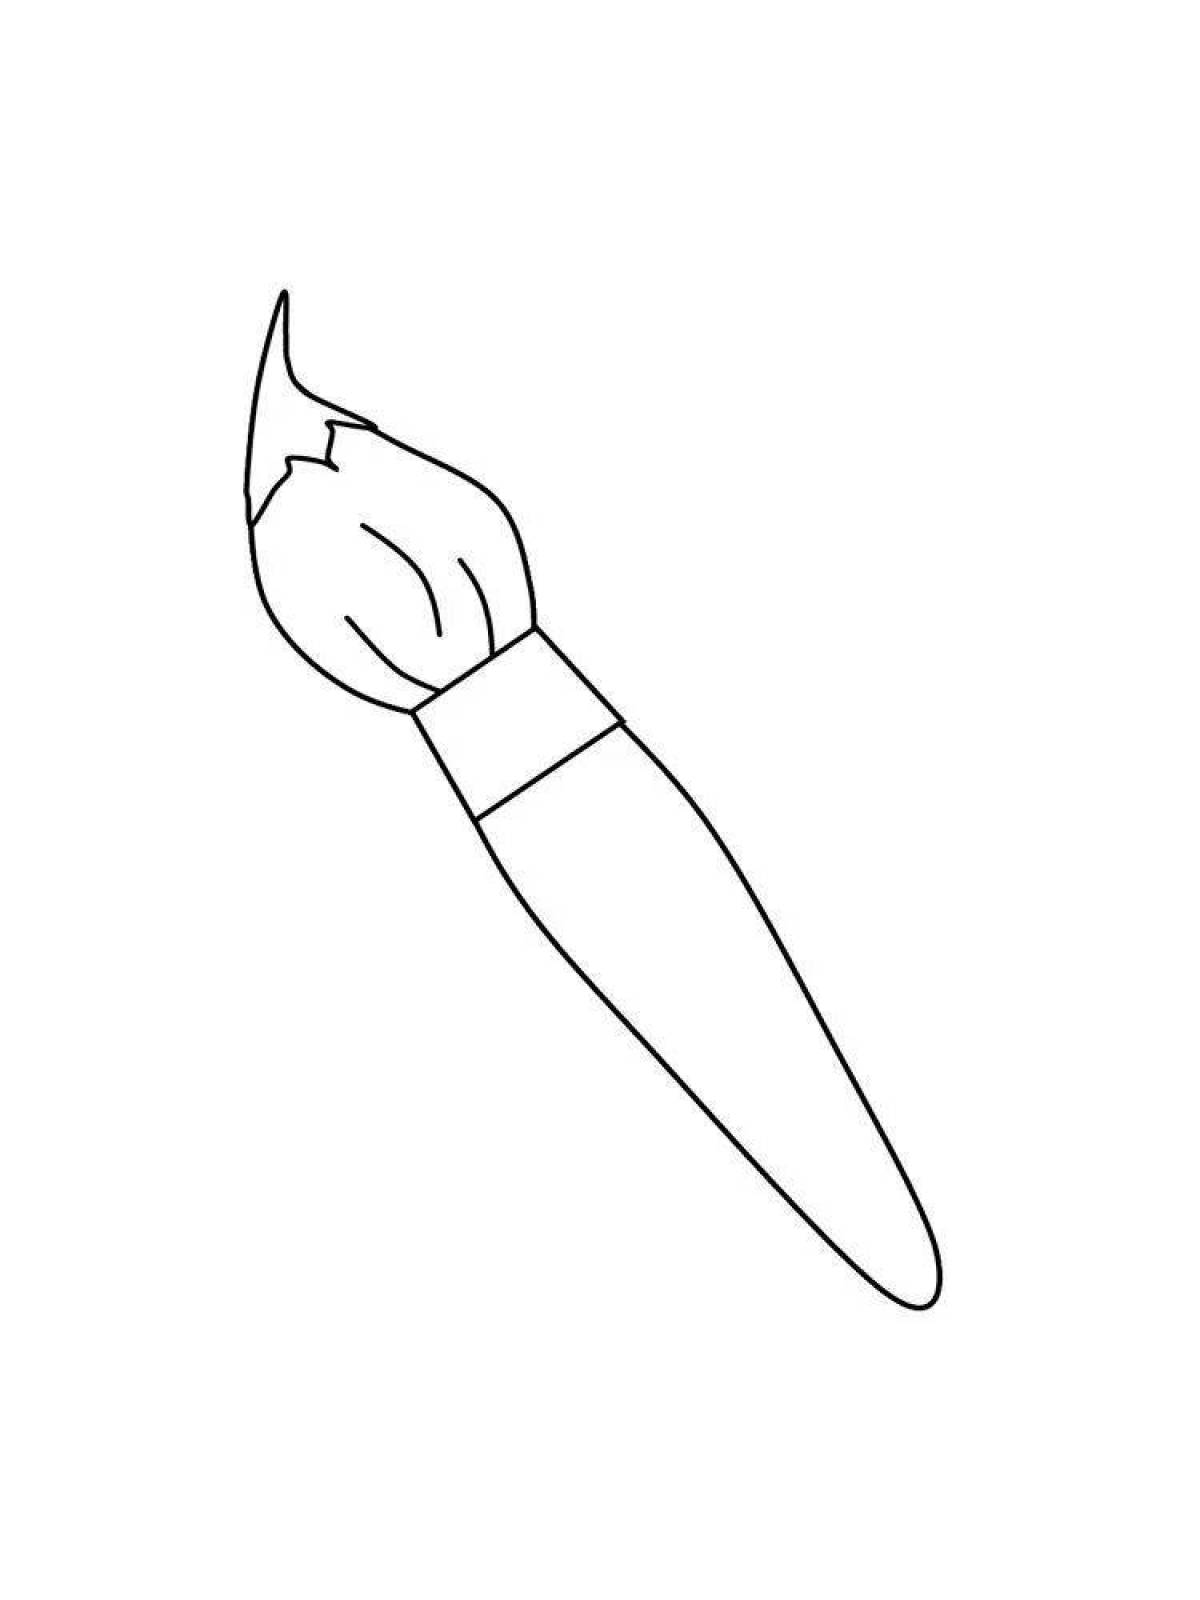 Live brushes for coloring pages